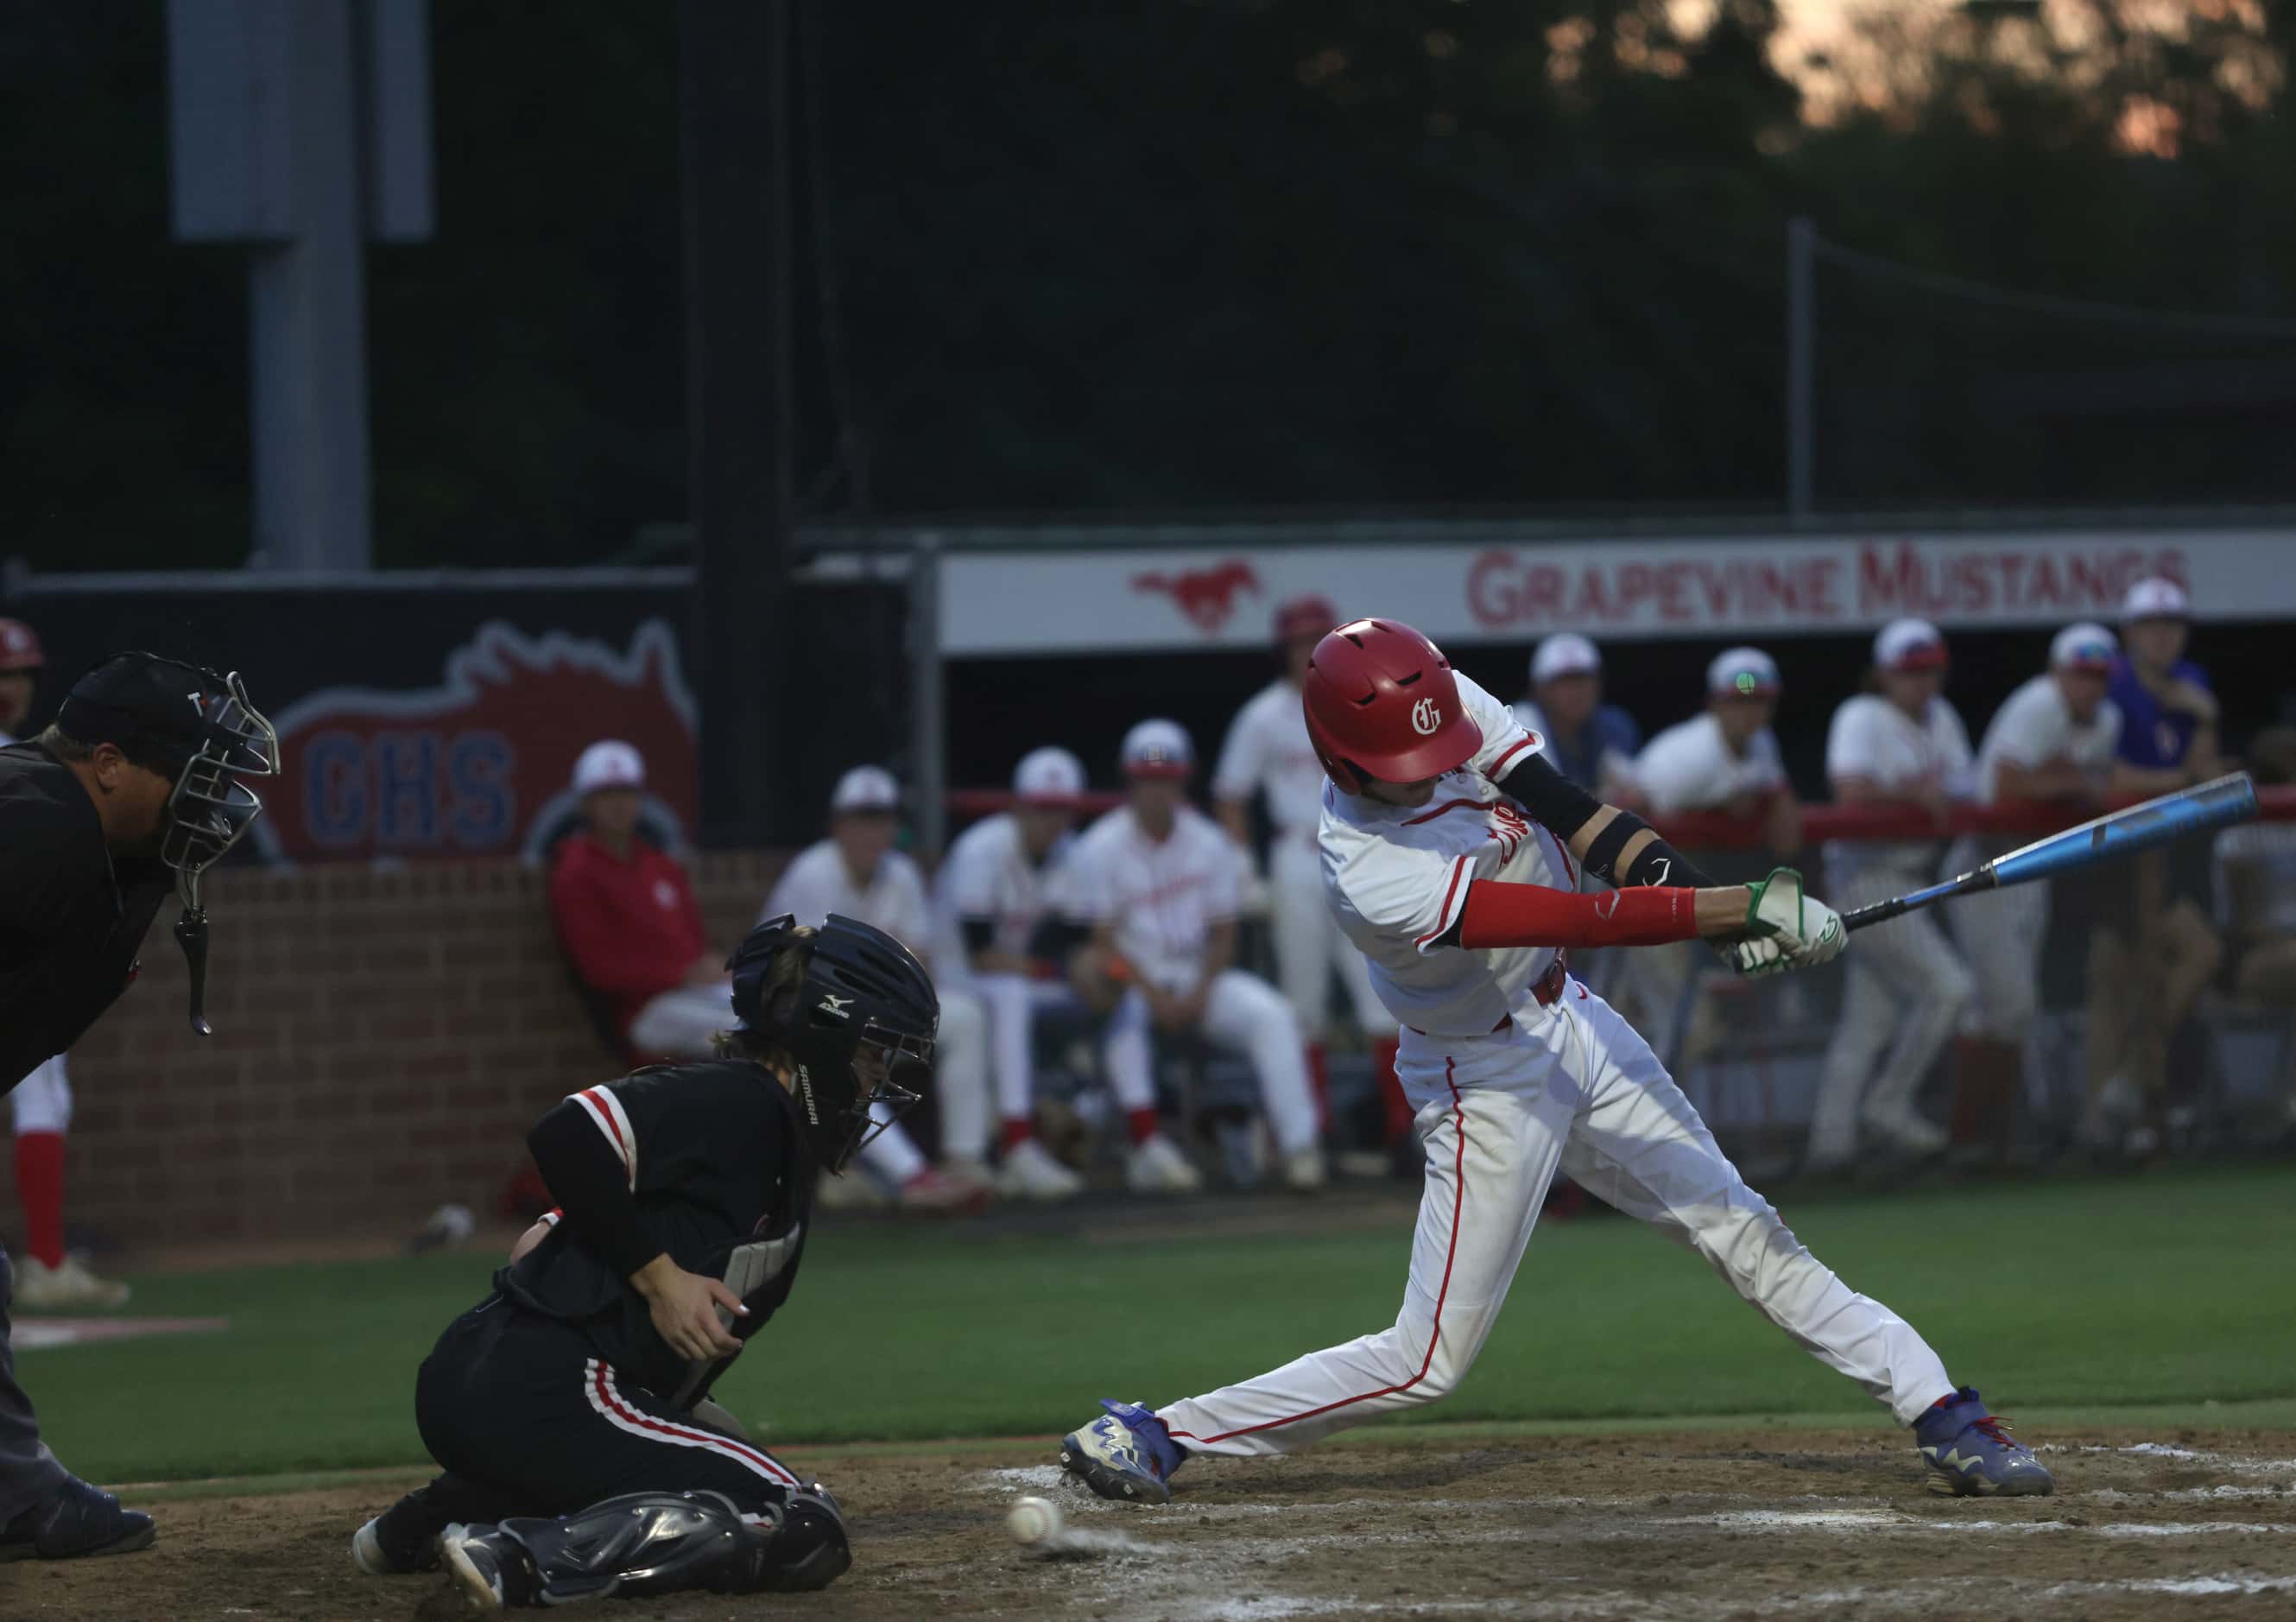 Grapevine High School player Gianni Corral tips the ball during a baseball game against...